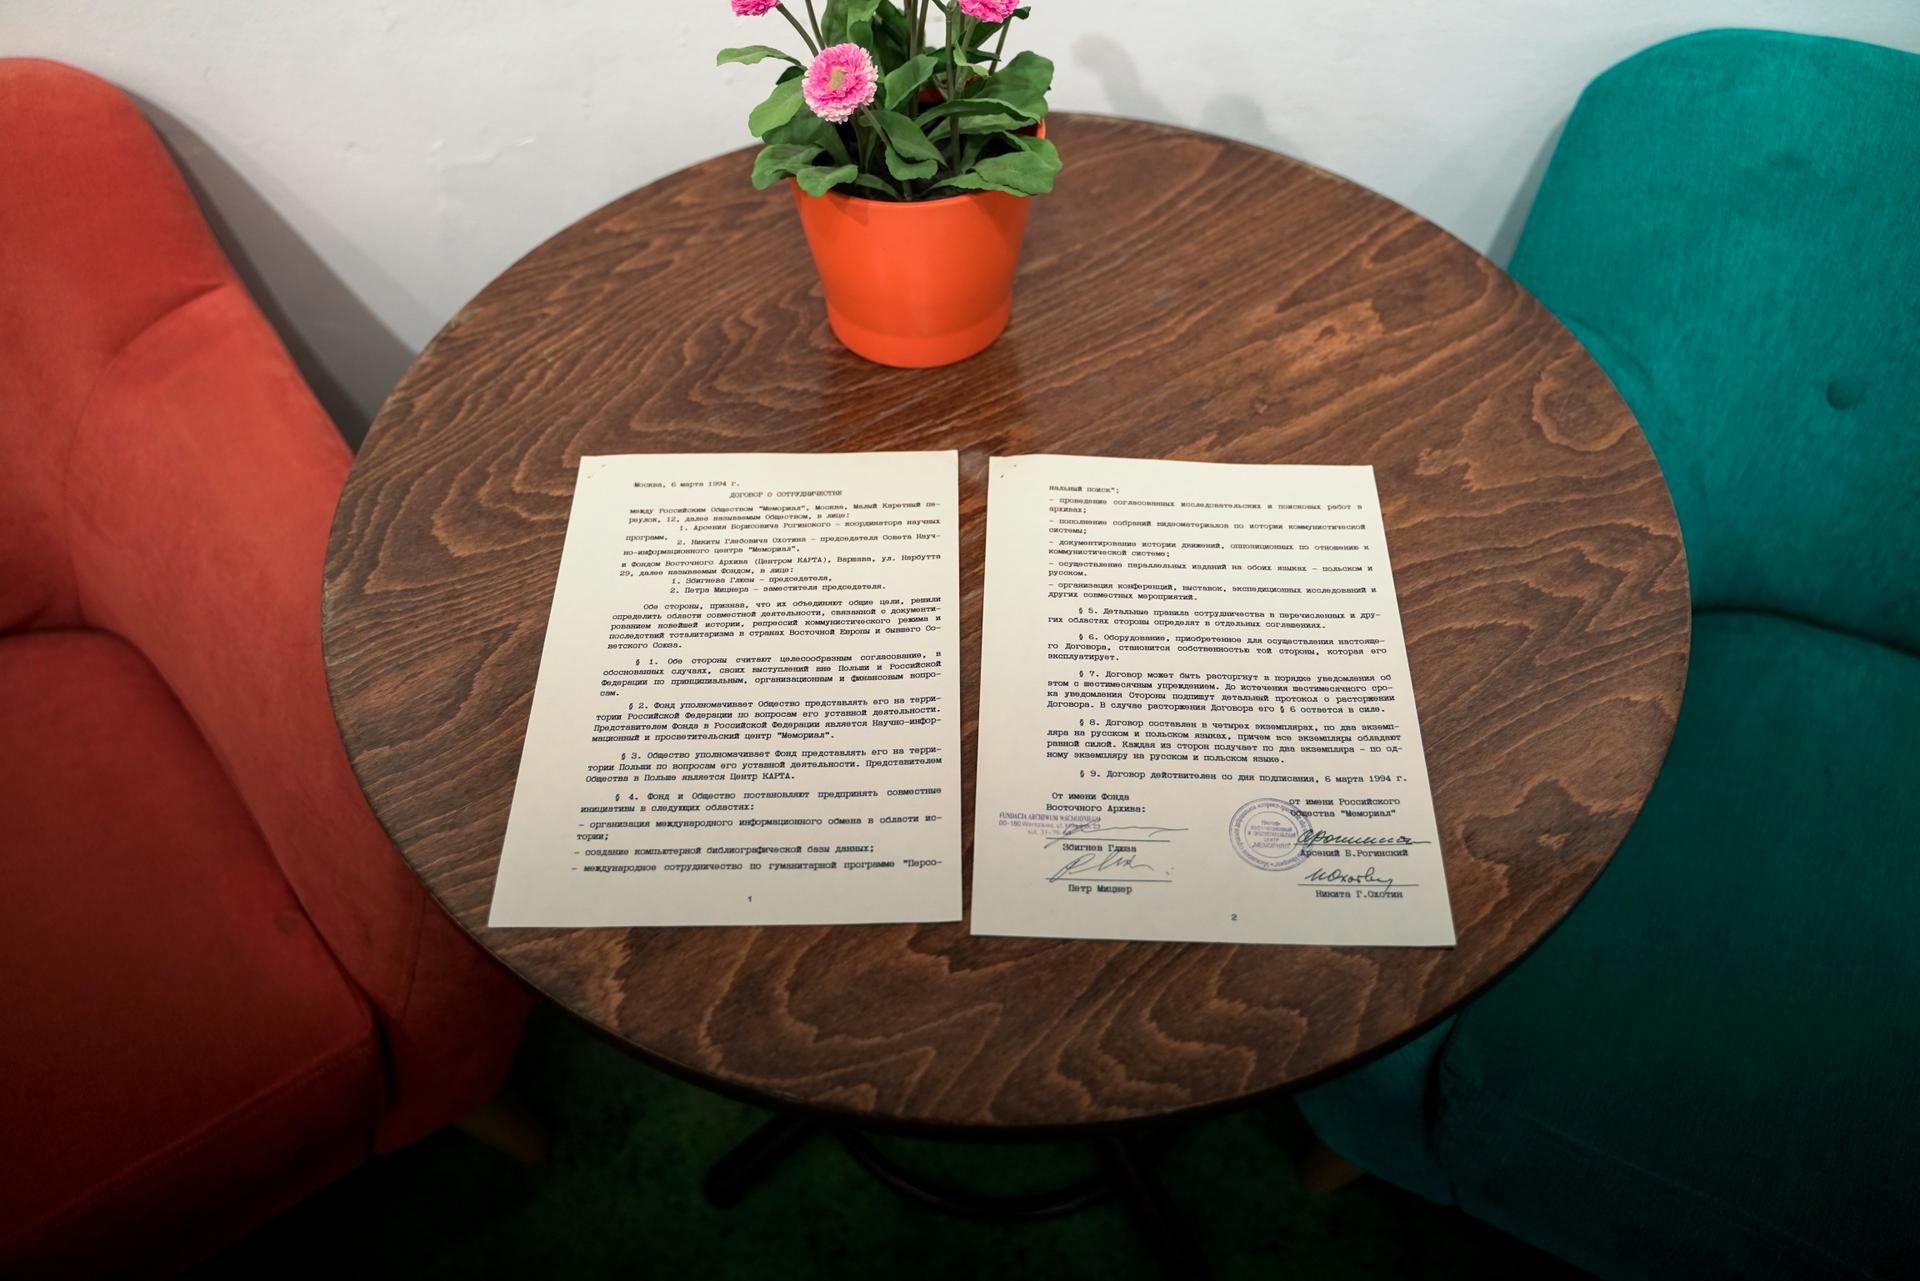 An agreement between rights group Memorial and nongovernmental organization KARTA.